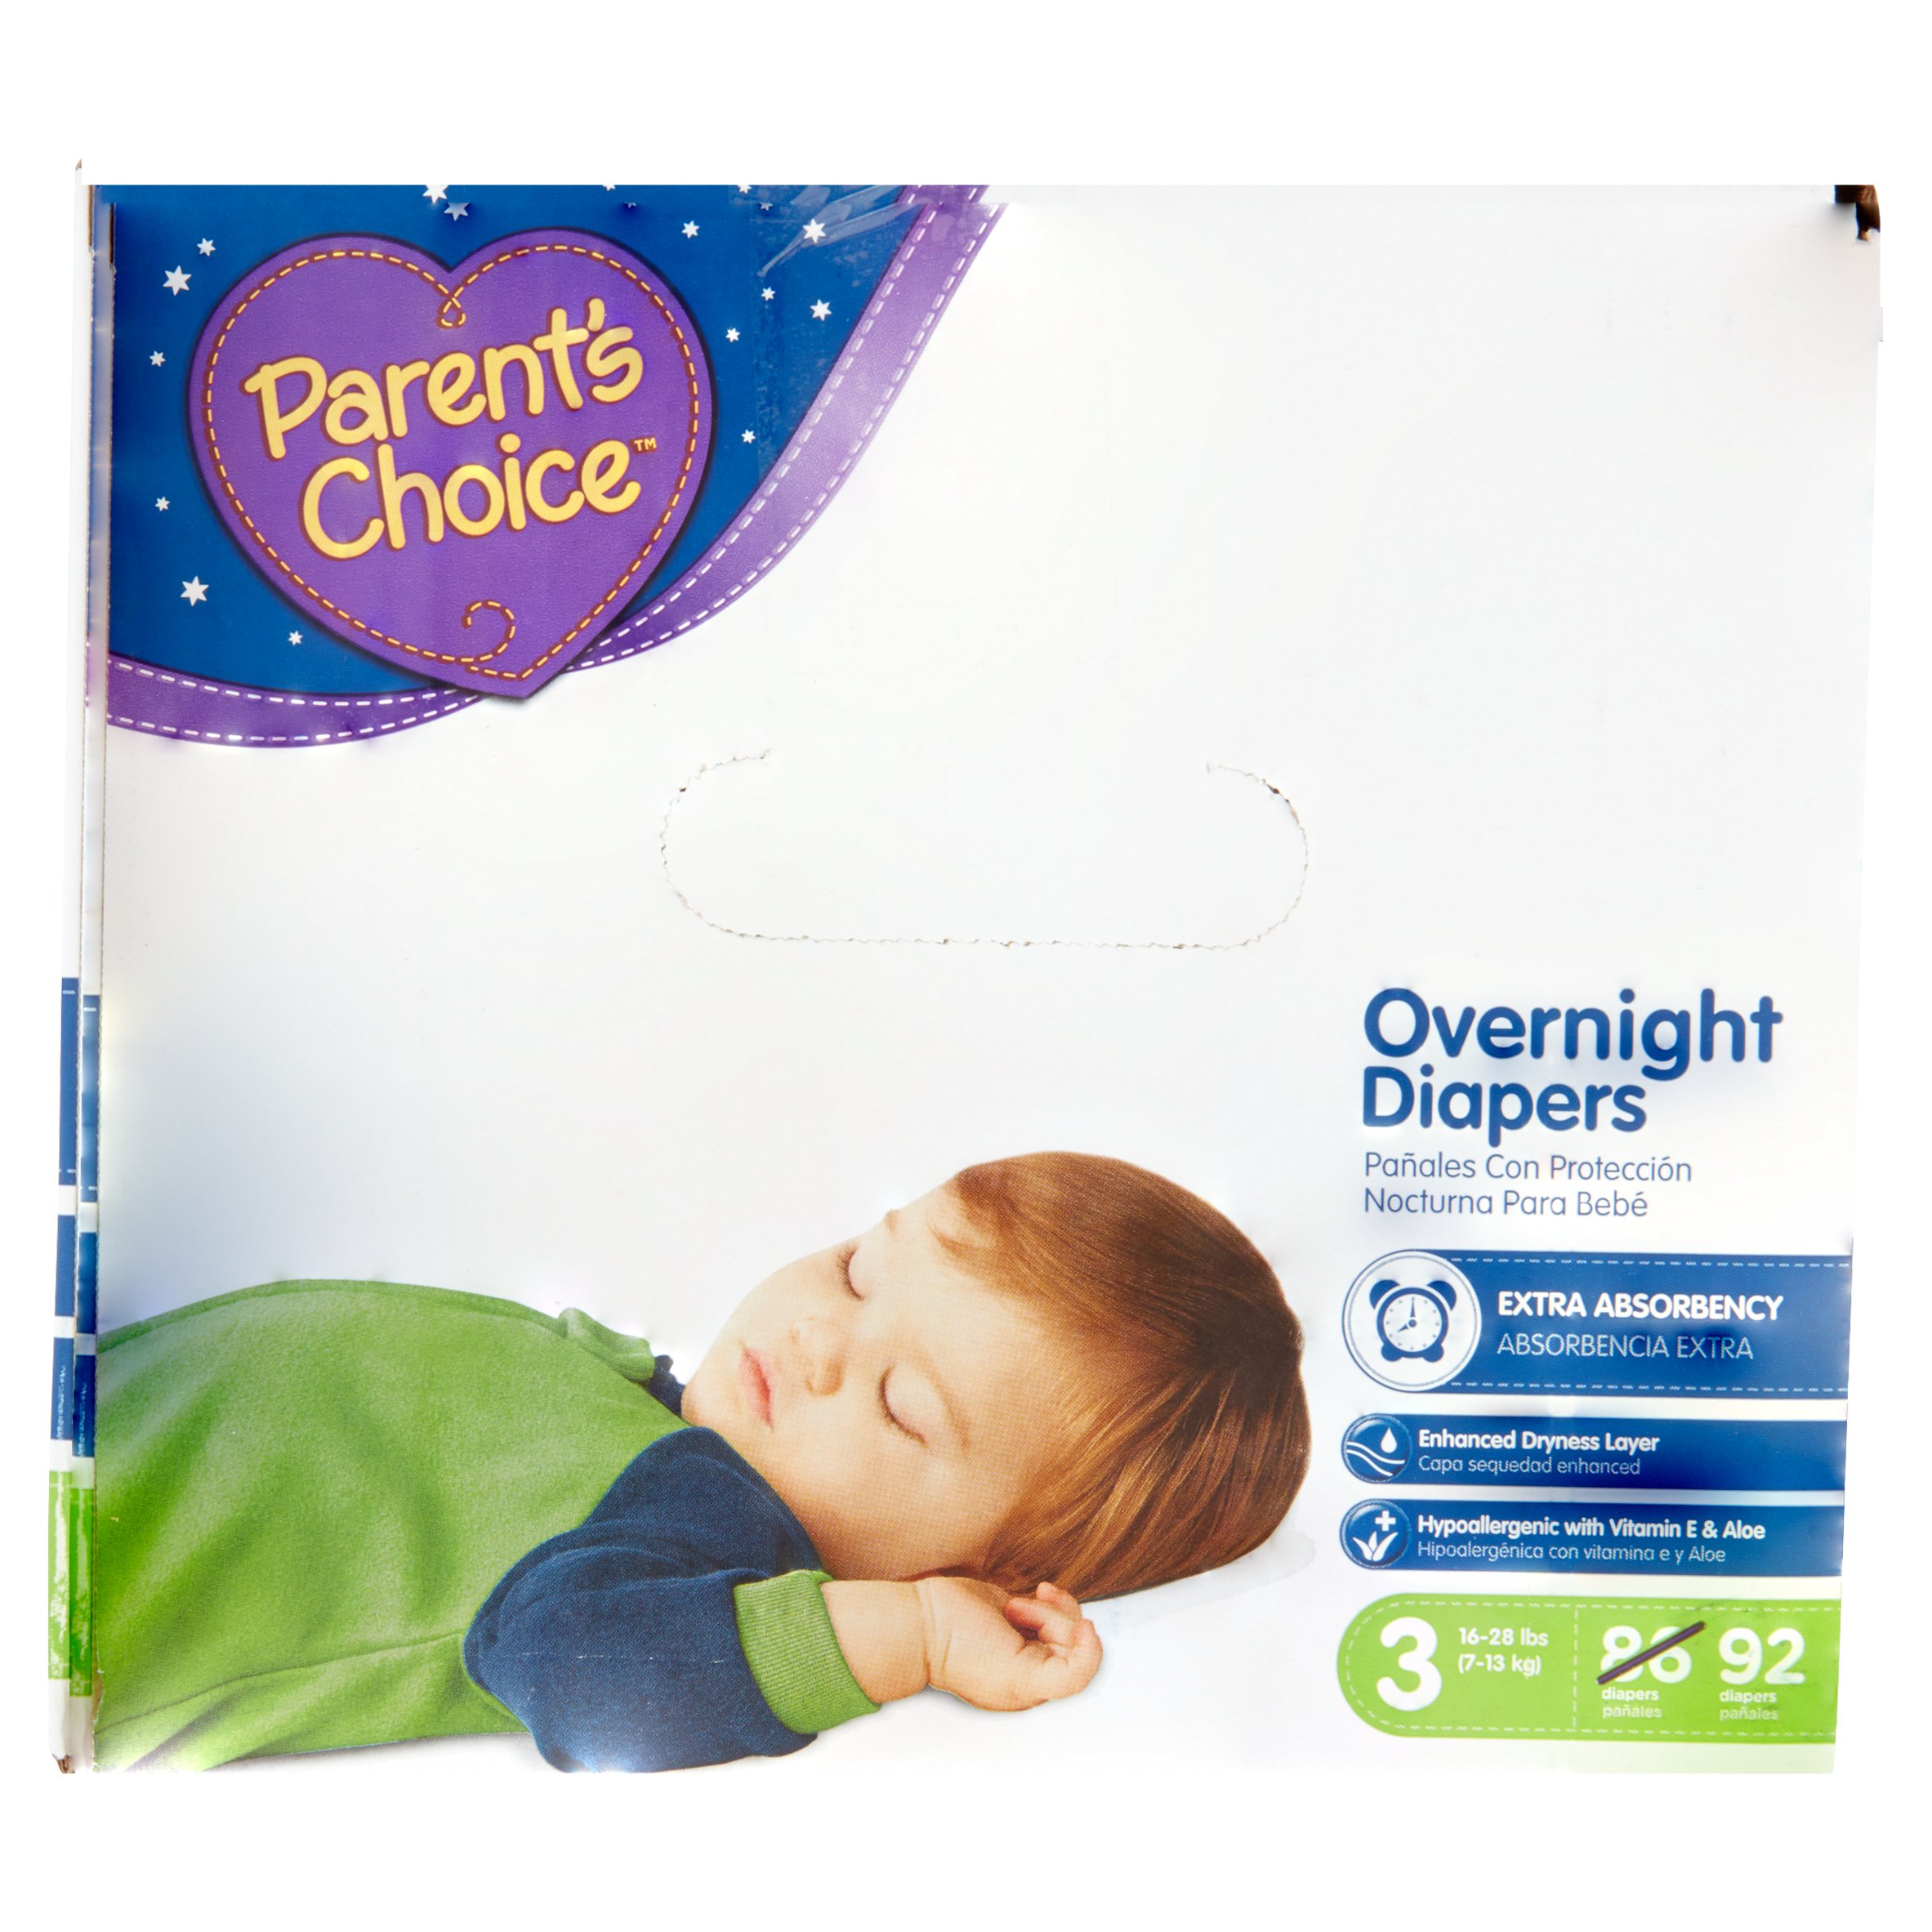 Parent's Choice Overnight Diapers, Size 3, 92 Diapers - image 3 of 5